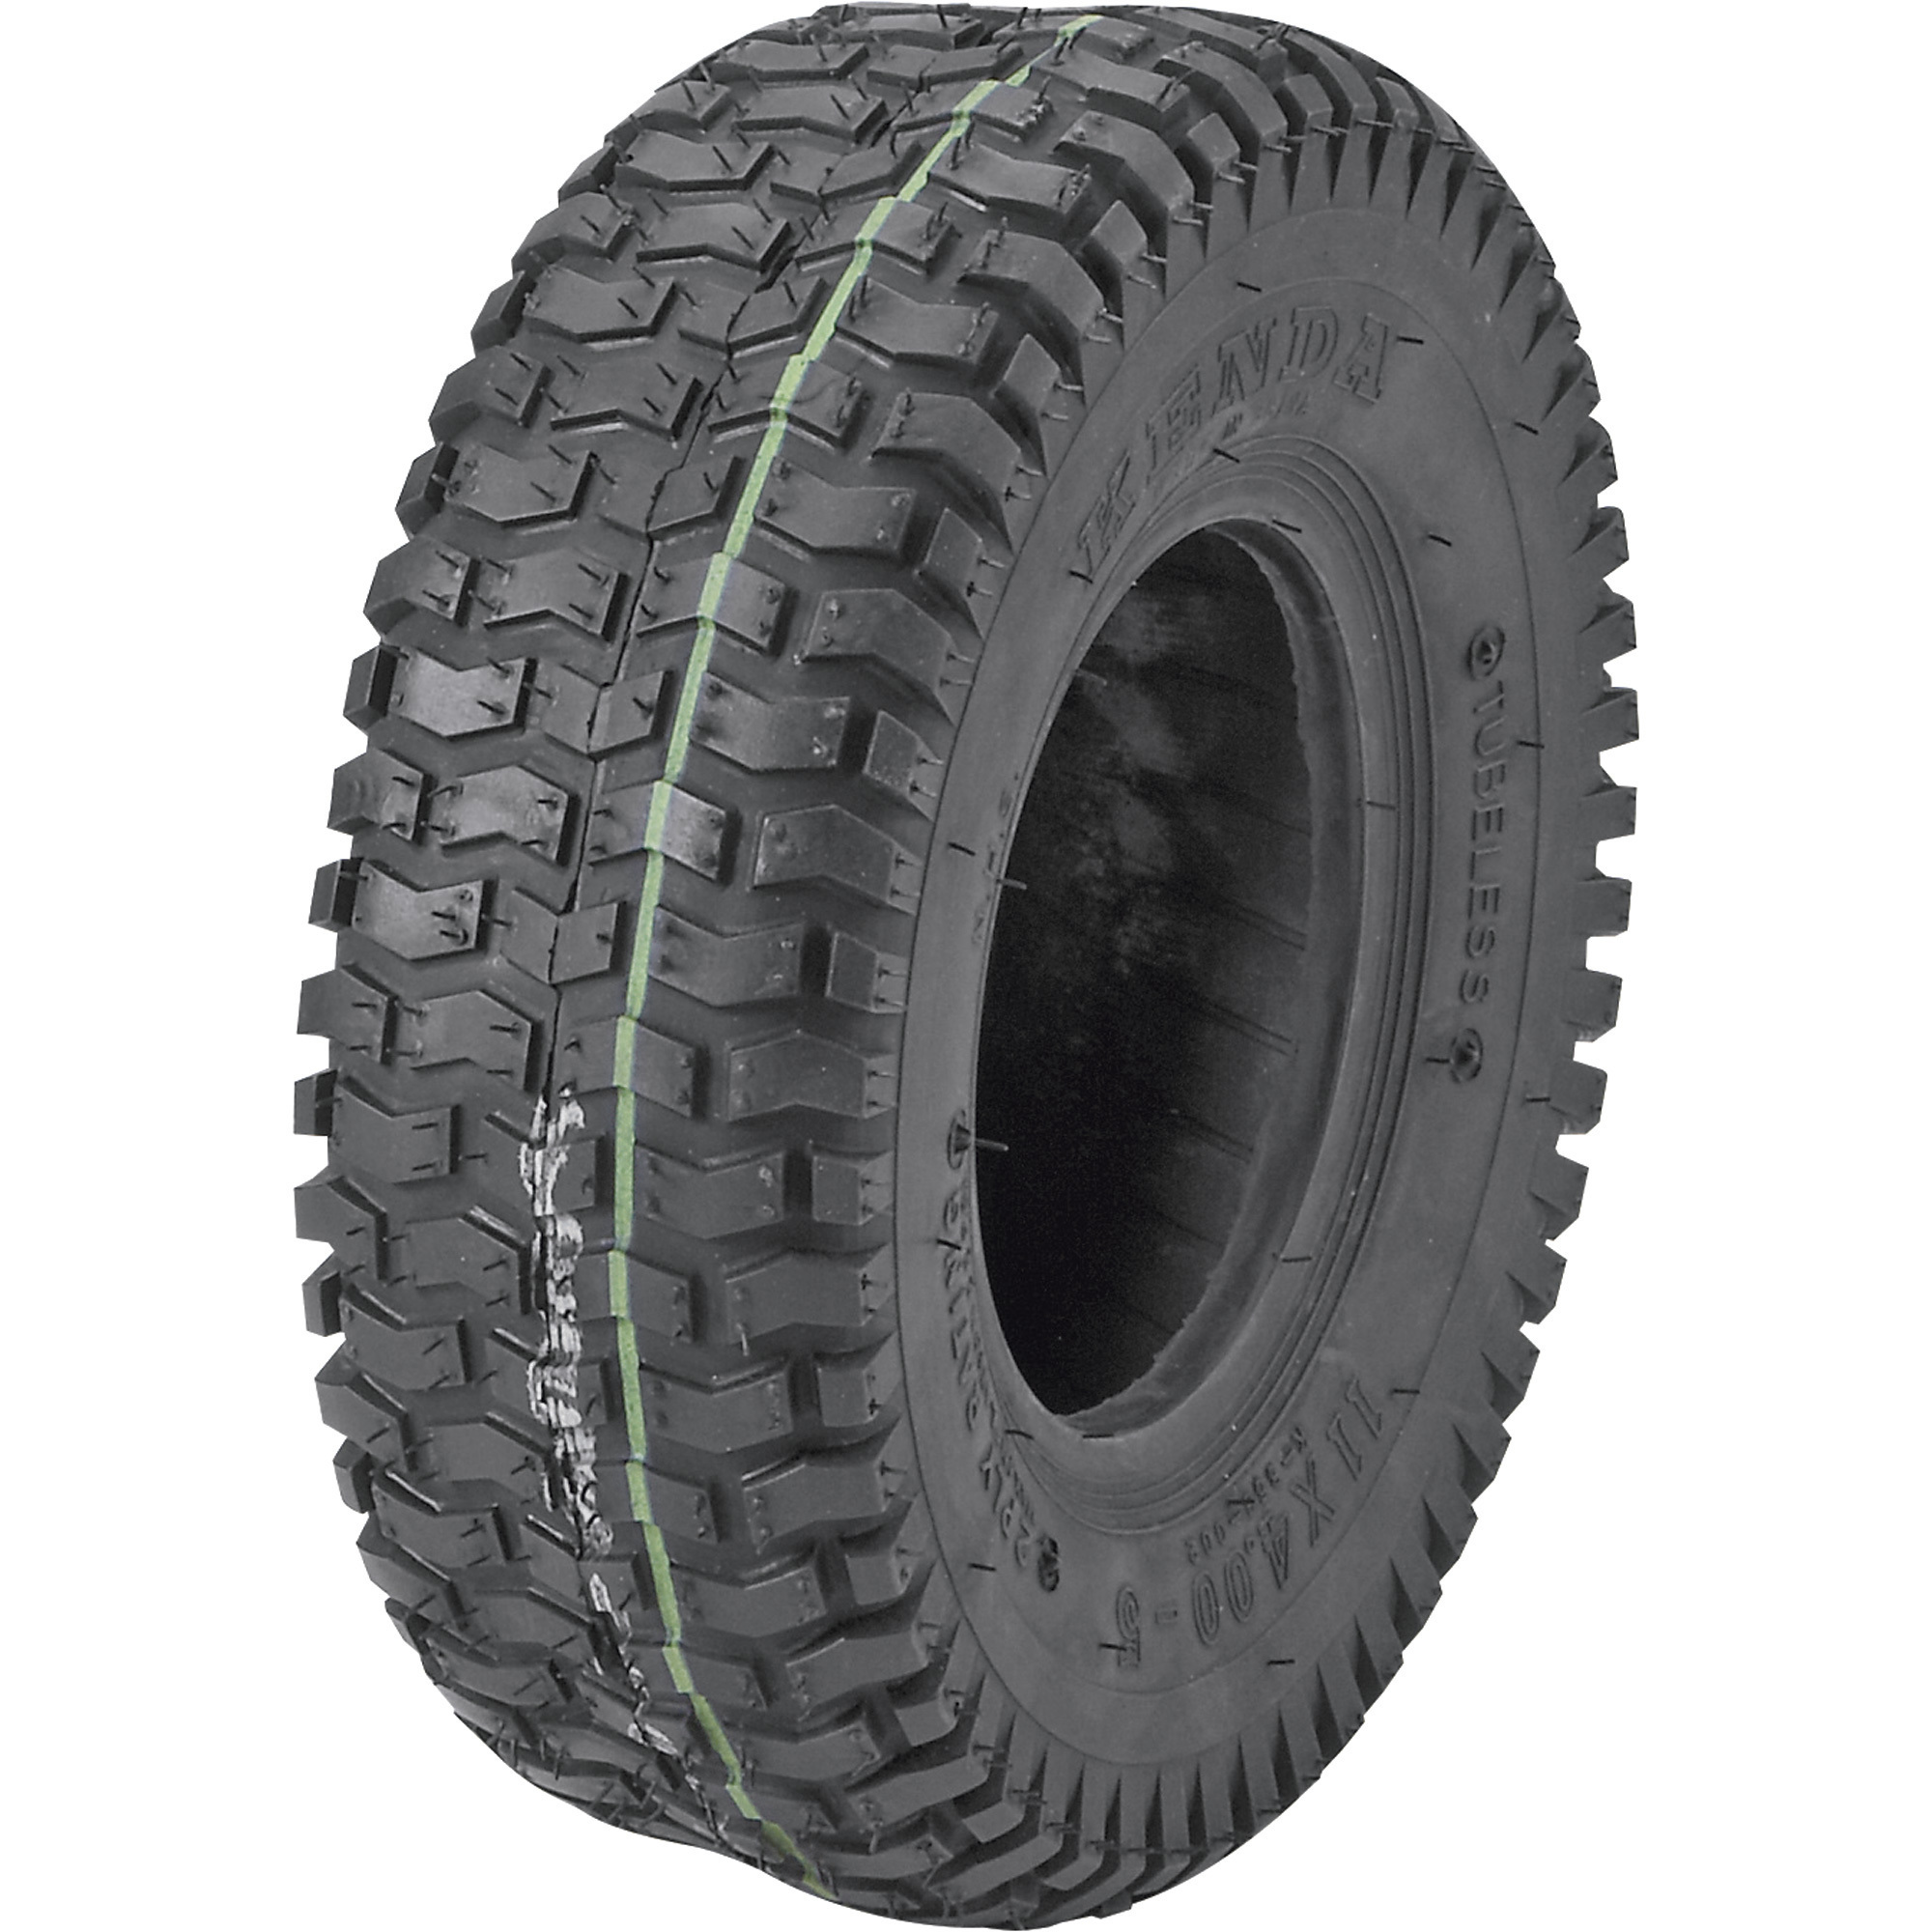 Lawn and Garden Tractor Tubeless Replacement Turf Tire â 13Inch x 5.00â6Inch